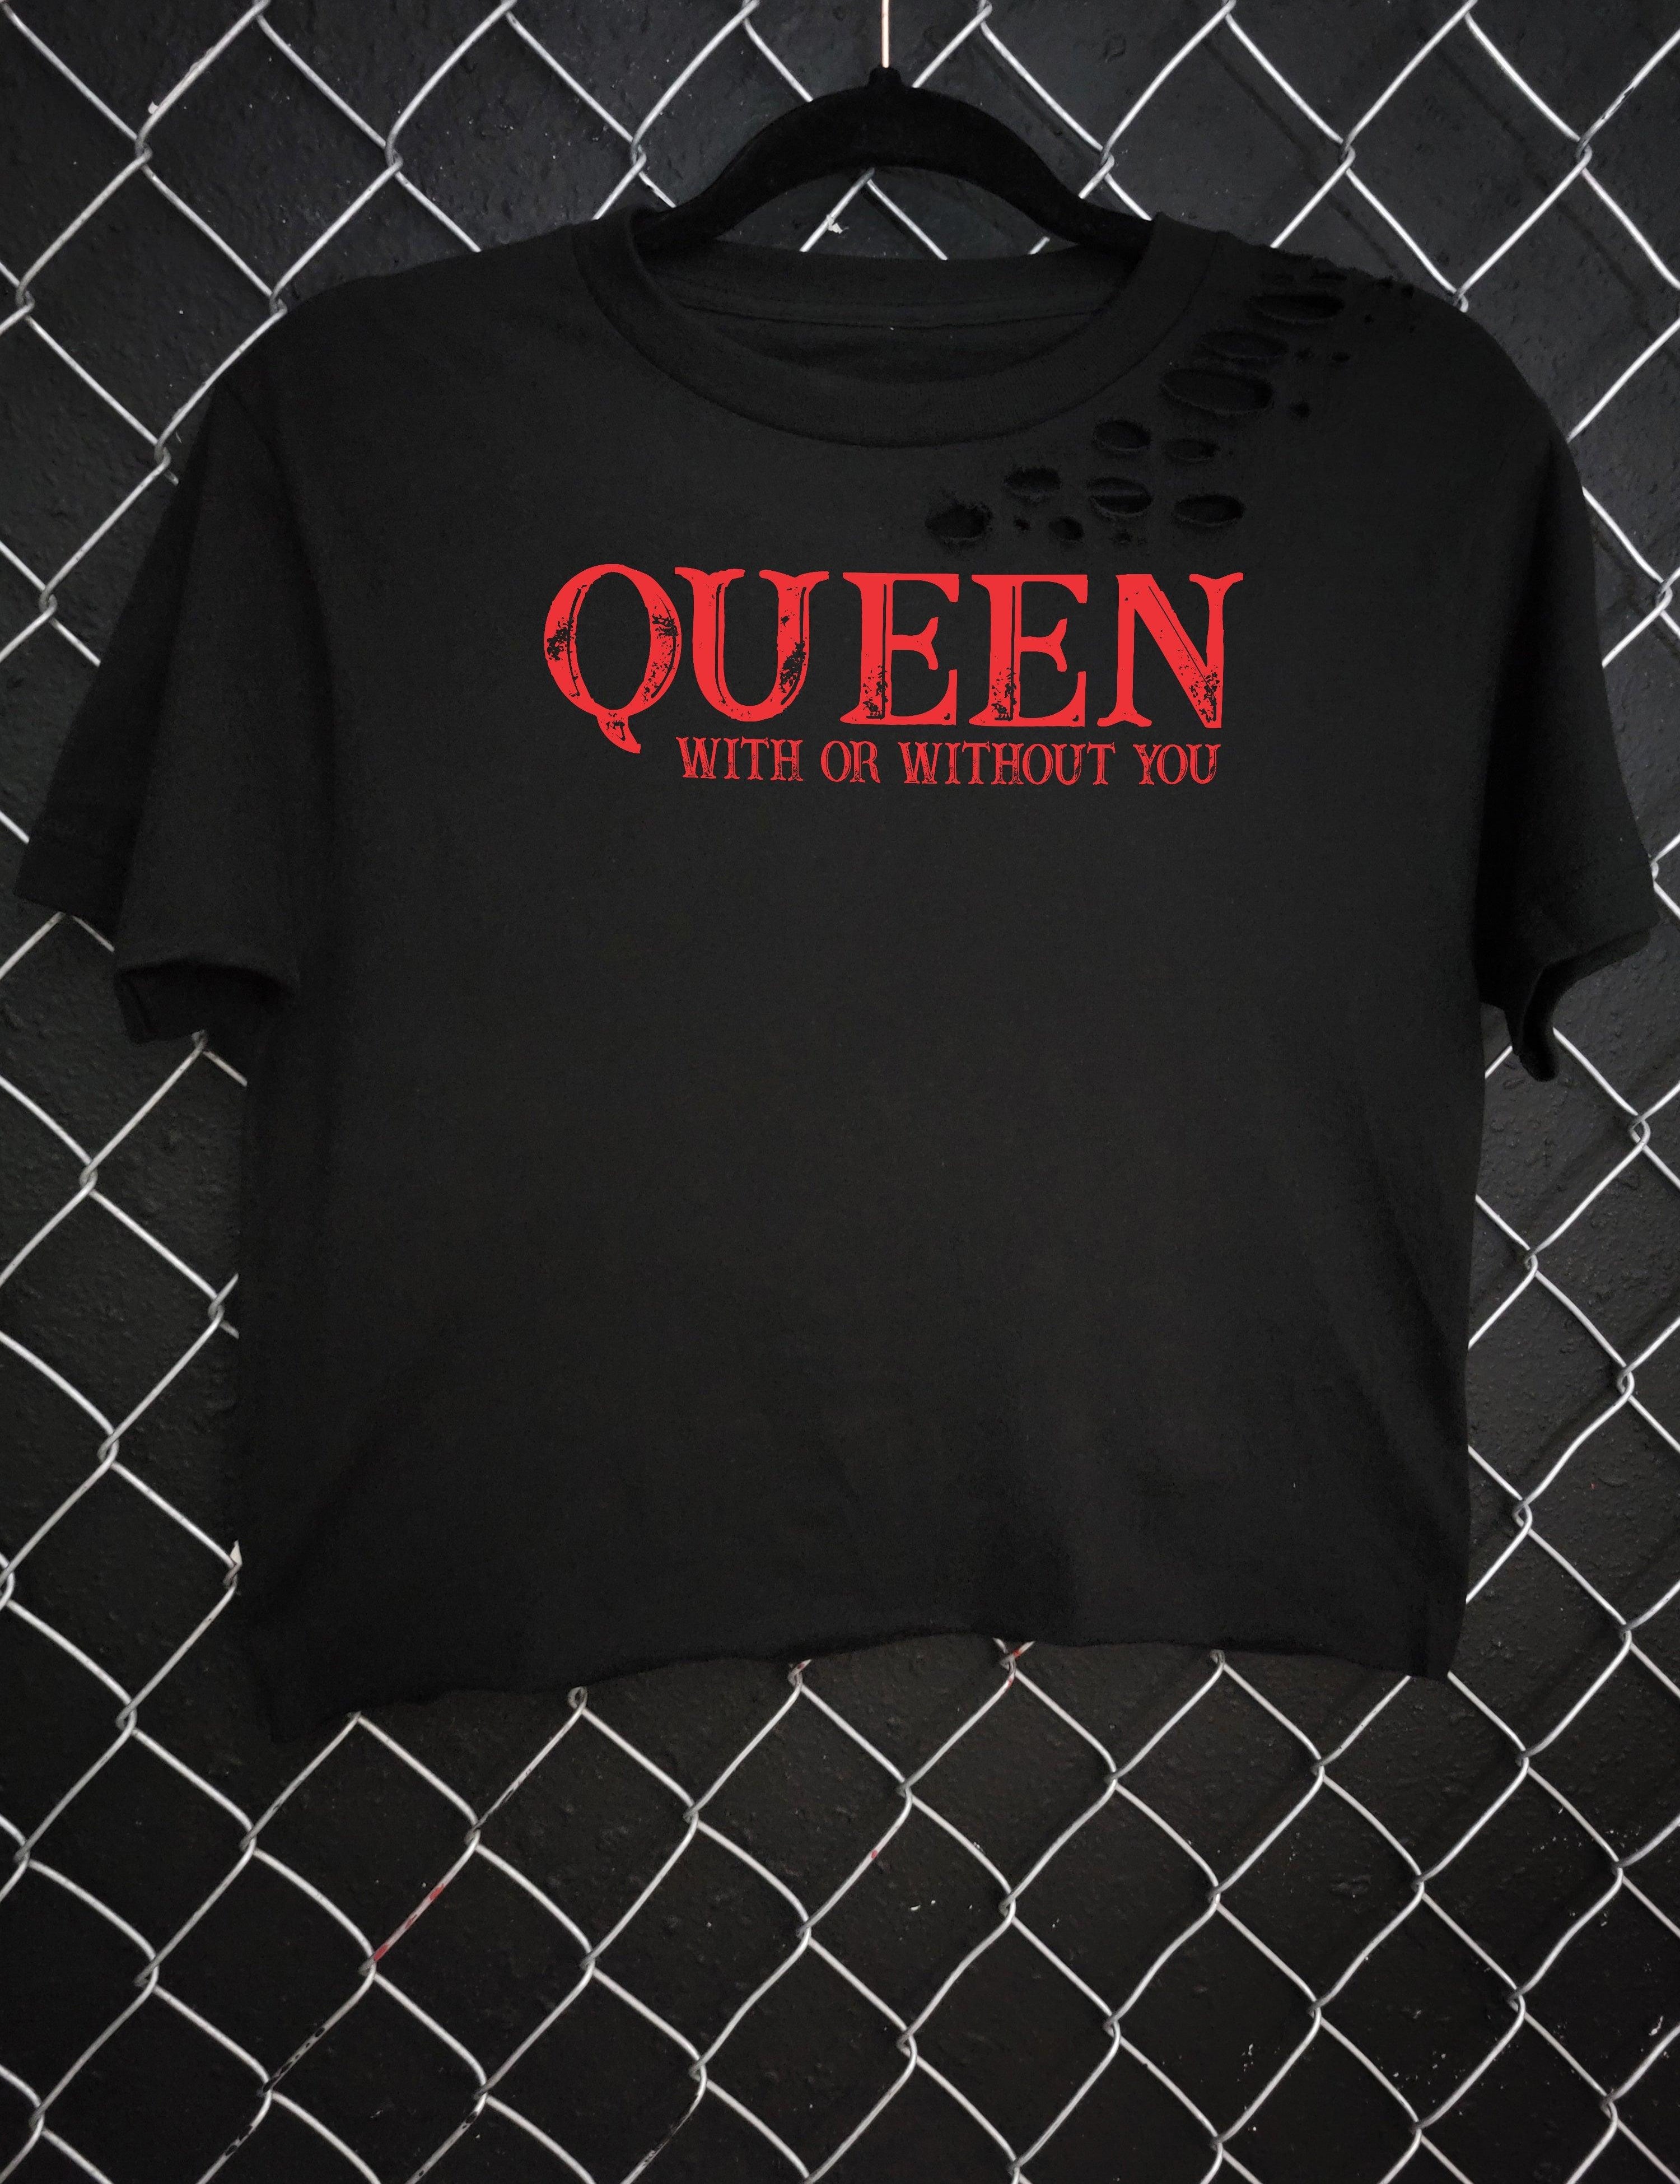 QUEEN CROP TOP - The Drive Clothing